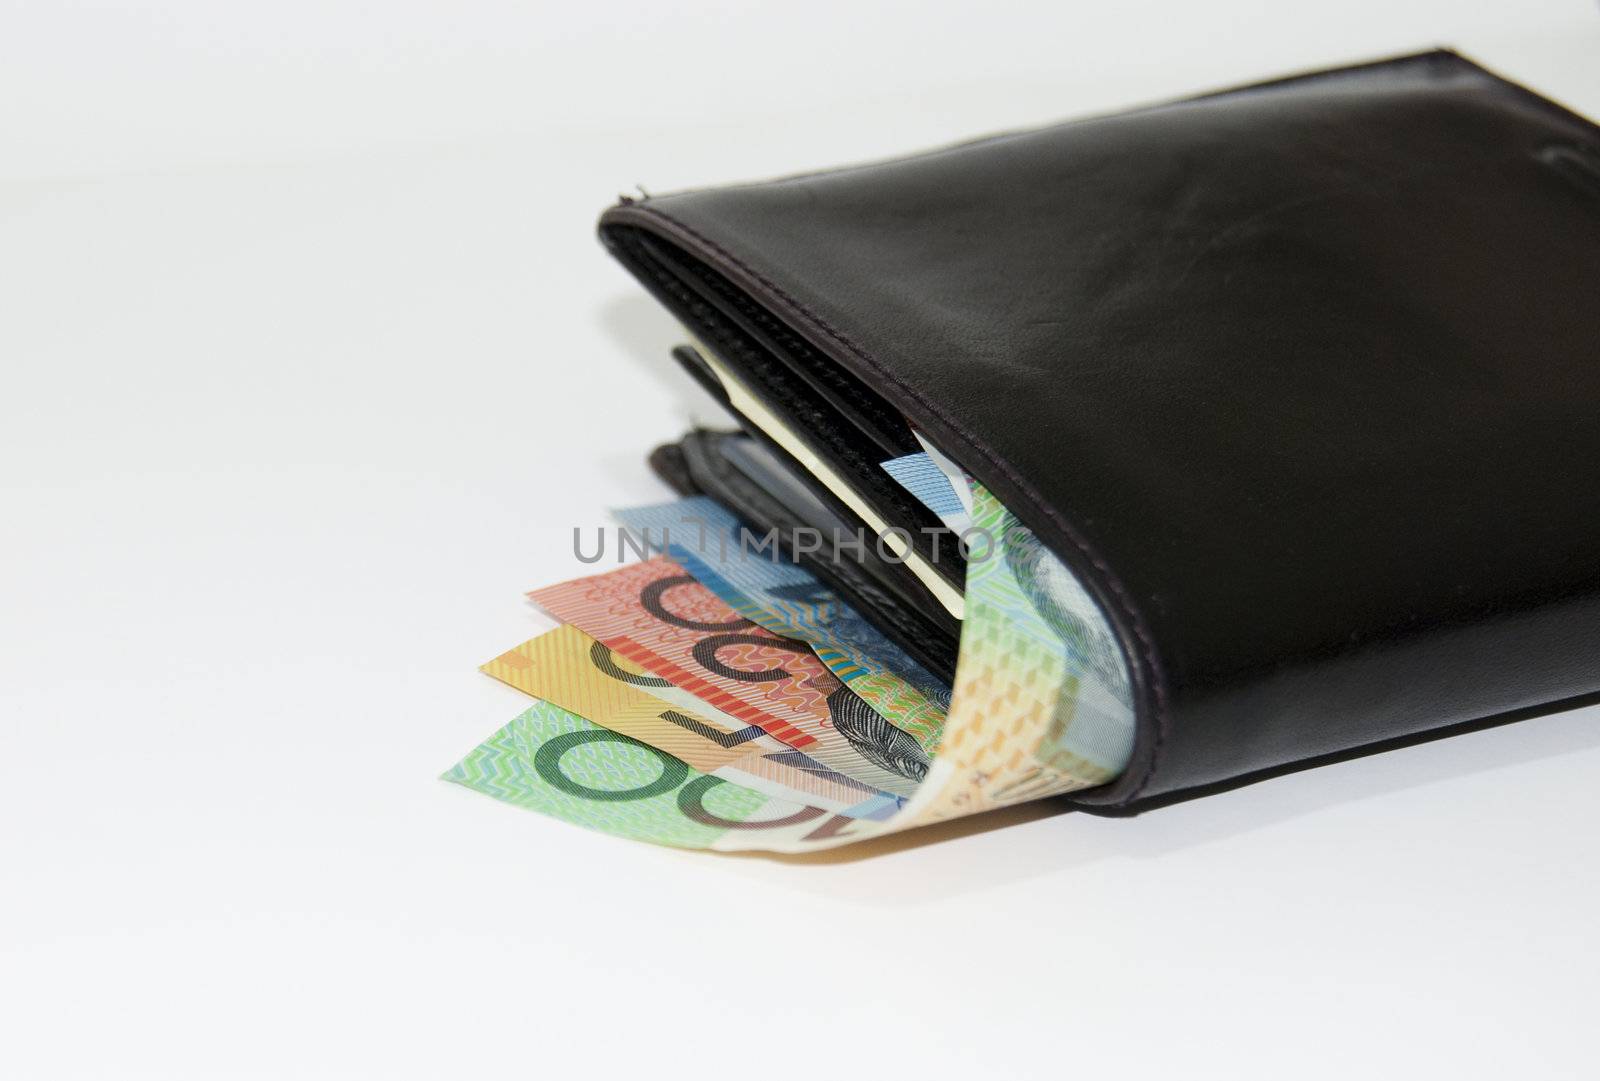 Collection of Australian fifty dollar currency notes in a black male wallet by wojciechkozlowski